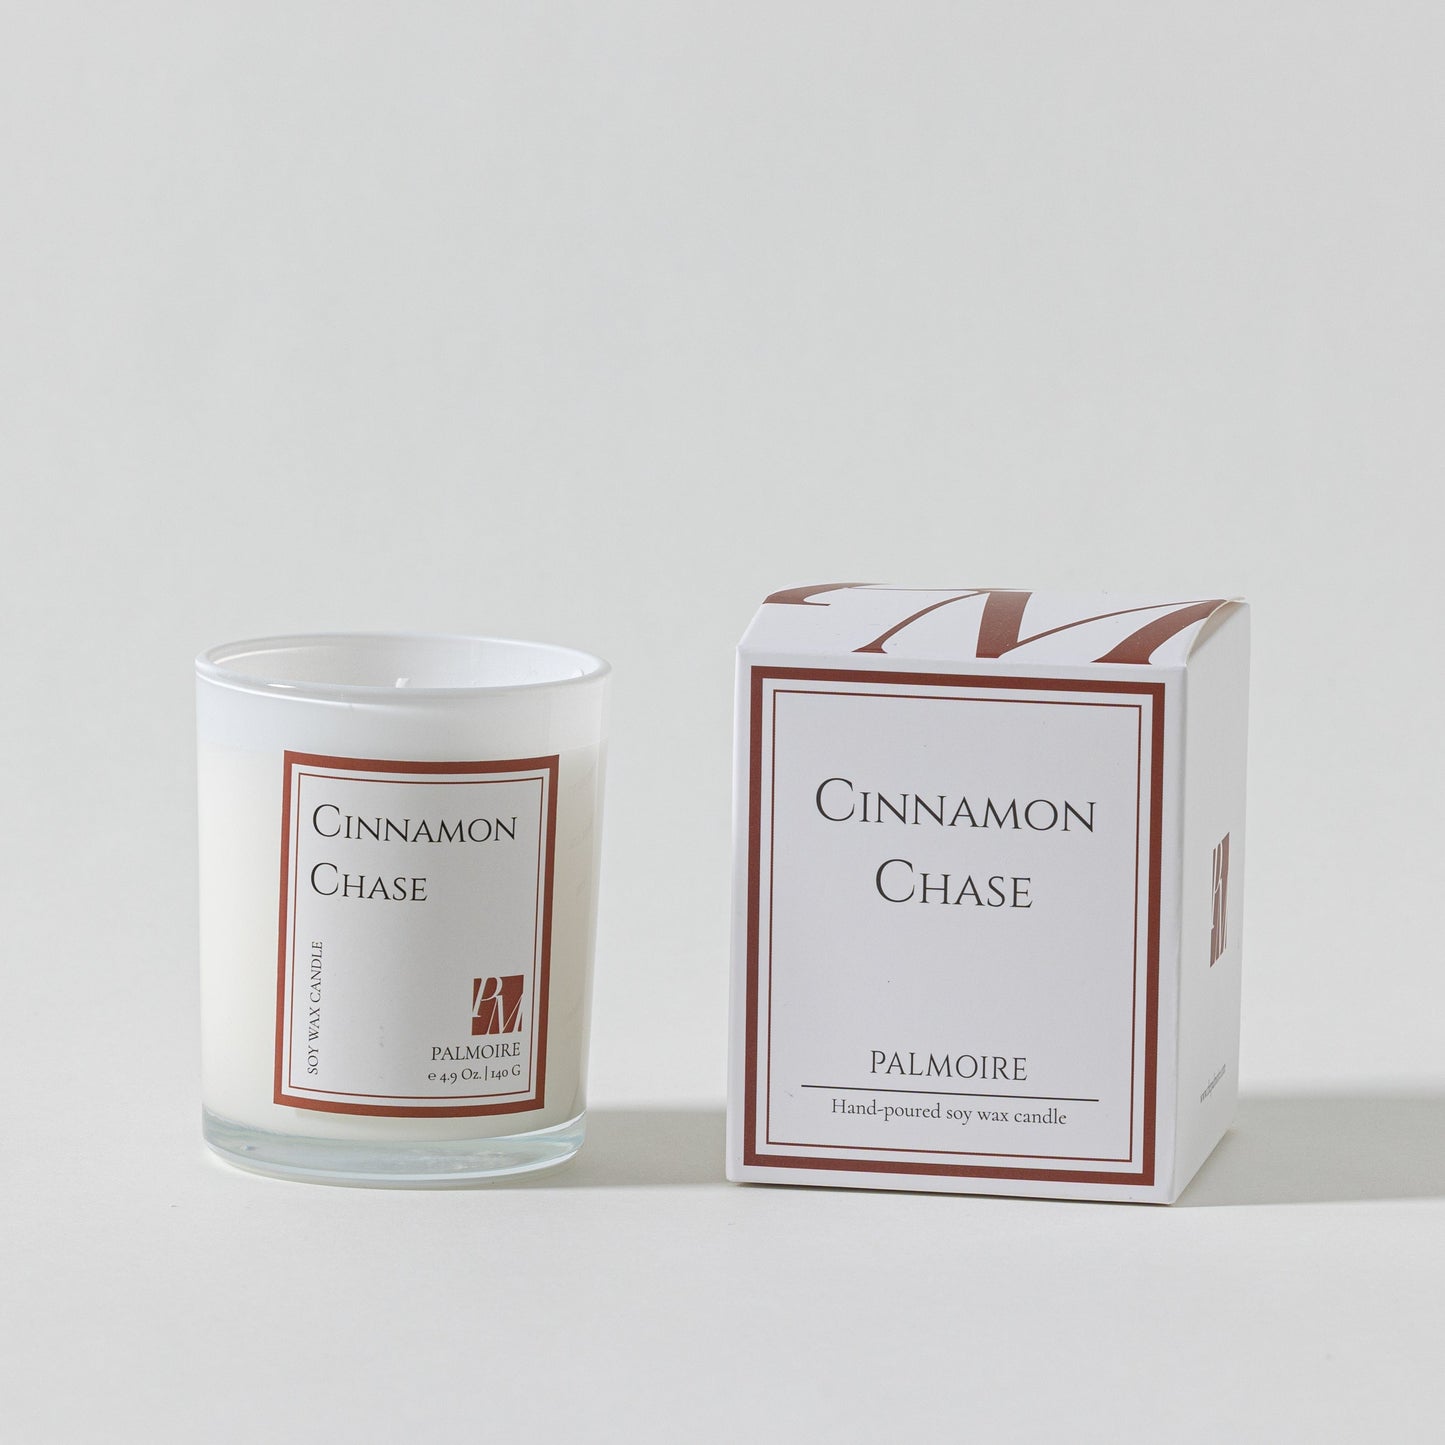 Cinnamon Chase Soy Wax Candle